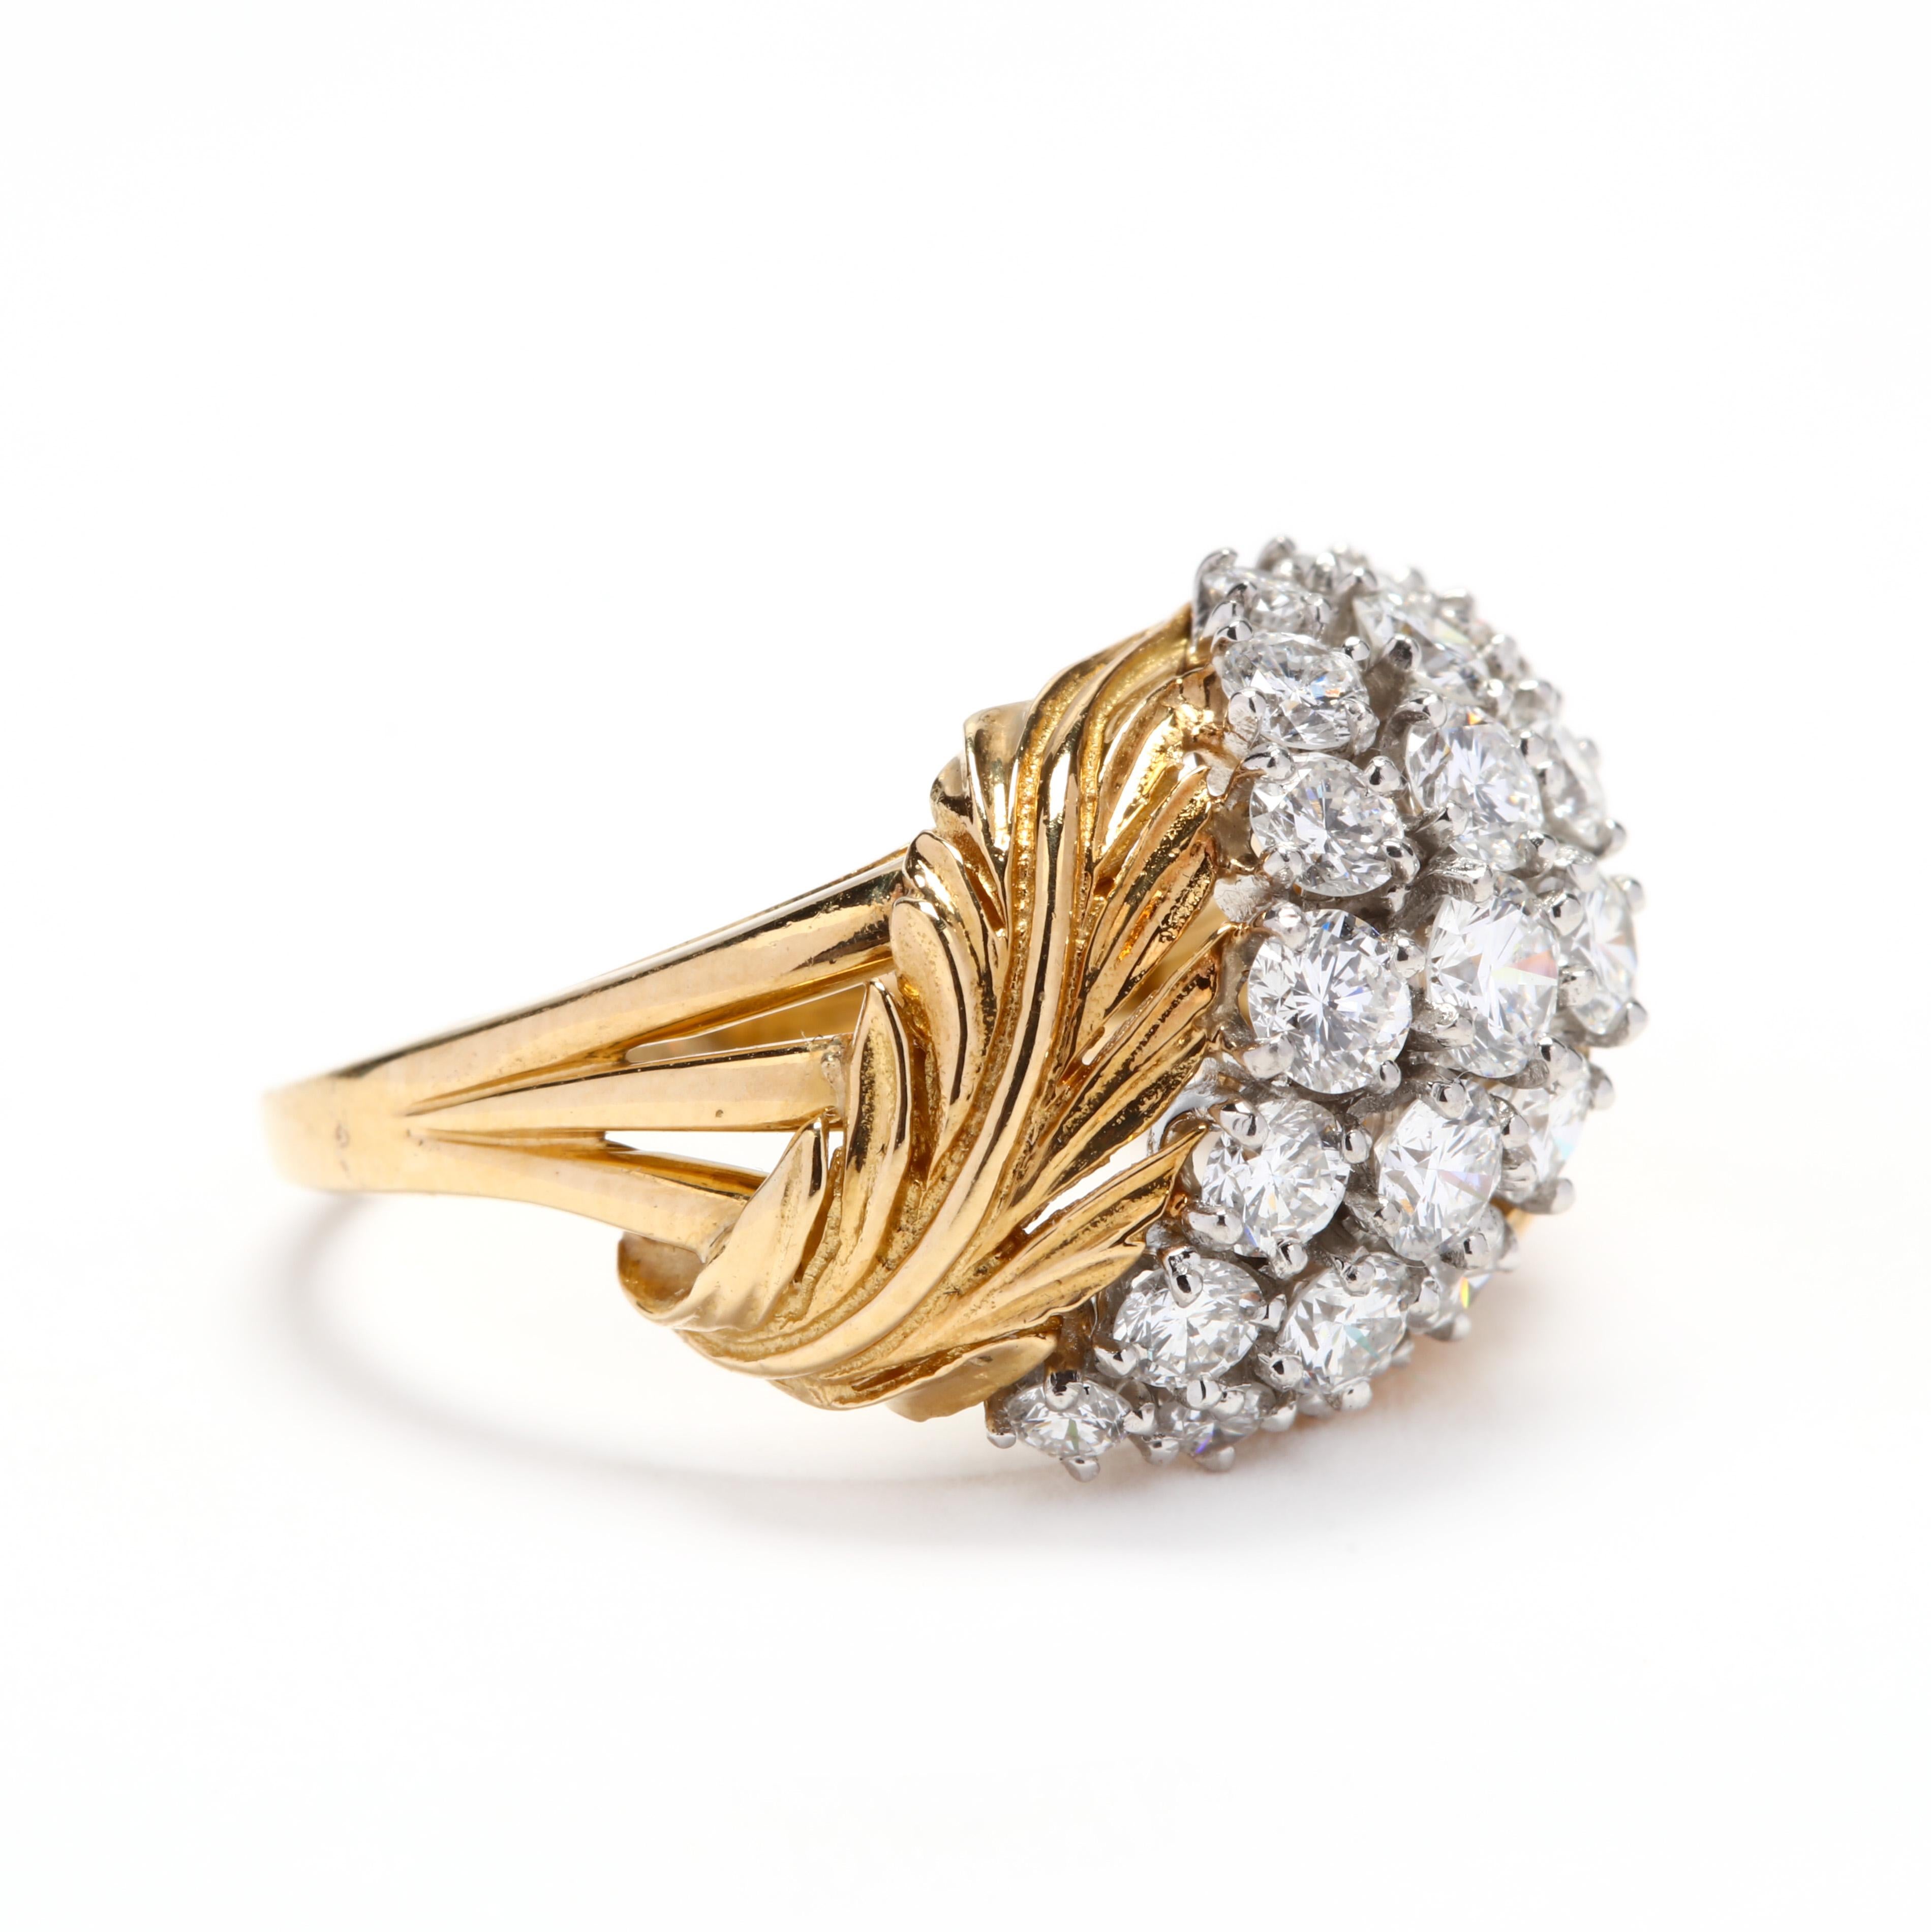 A vintage 18 karat yellow gold diamond cluster leaf ring. This ring features a cluster of prong set round brilliant cut diamonds weighing approximately 1.70 total carats with a leaf motif on either side and a triple split band.

Stones:

- diamonds,